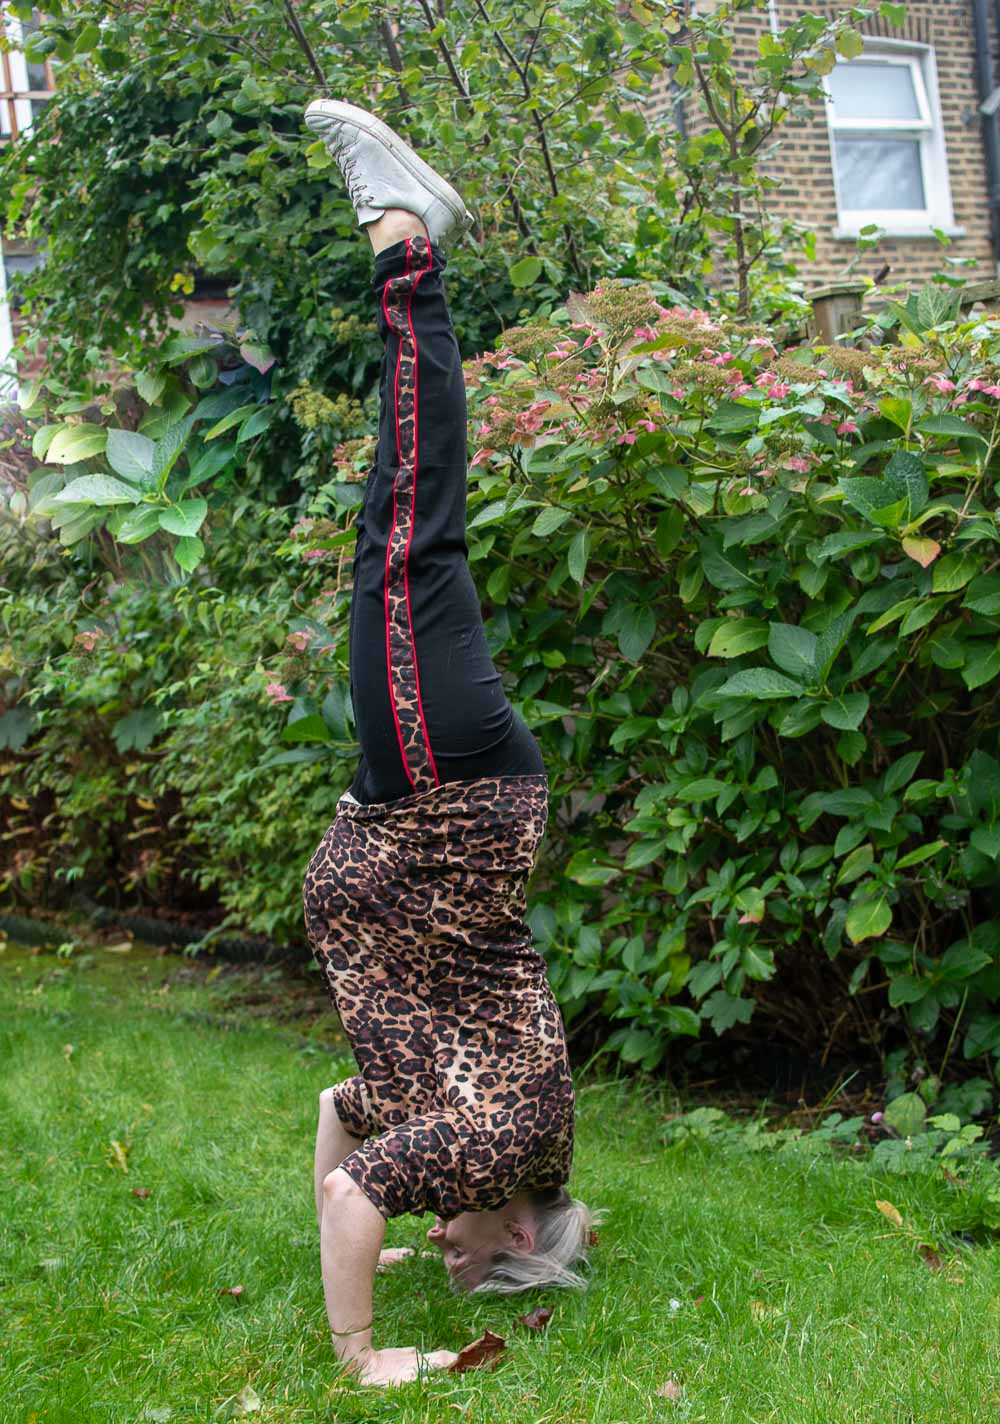 Karen Maurice of n4mummy doing a head stand wearing Asquith's eco-friendly activewear